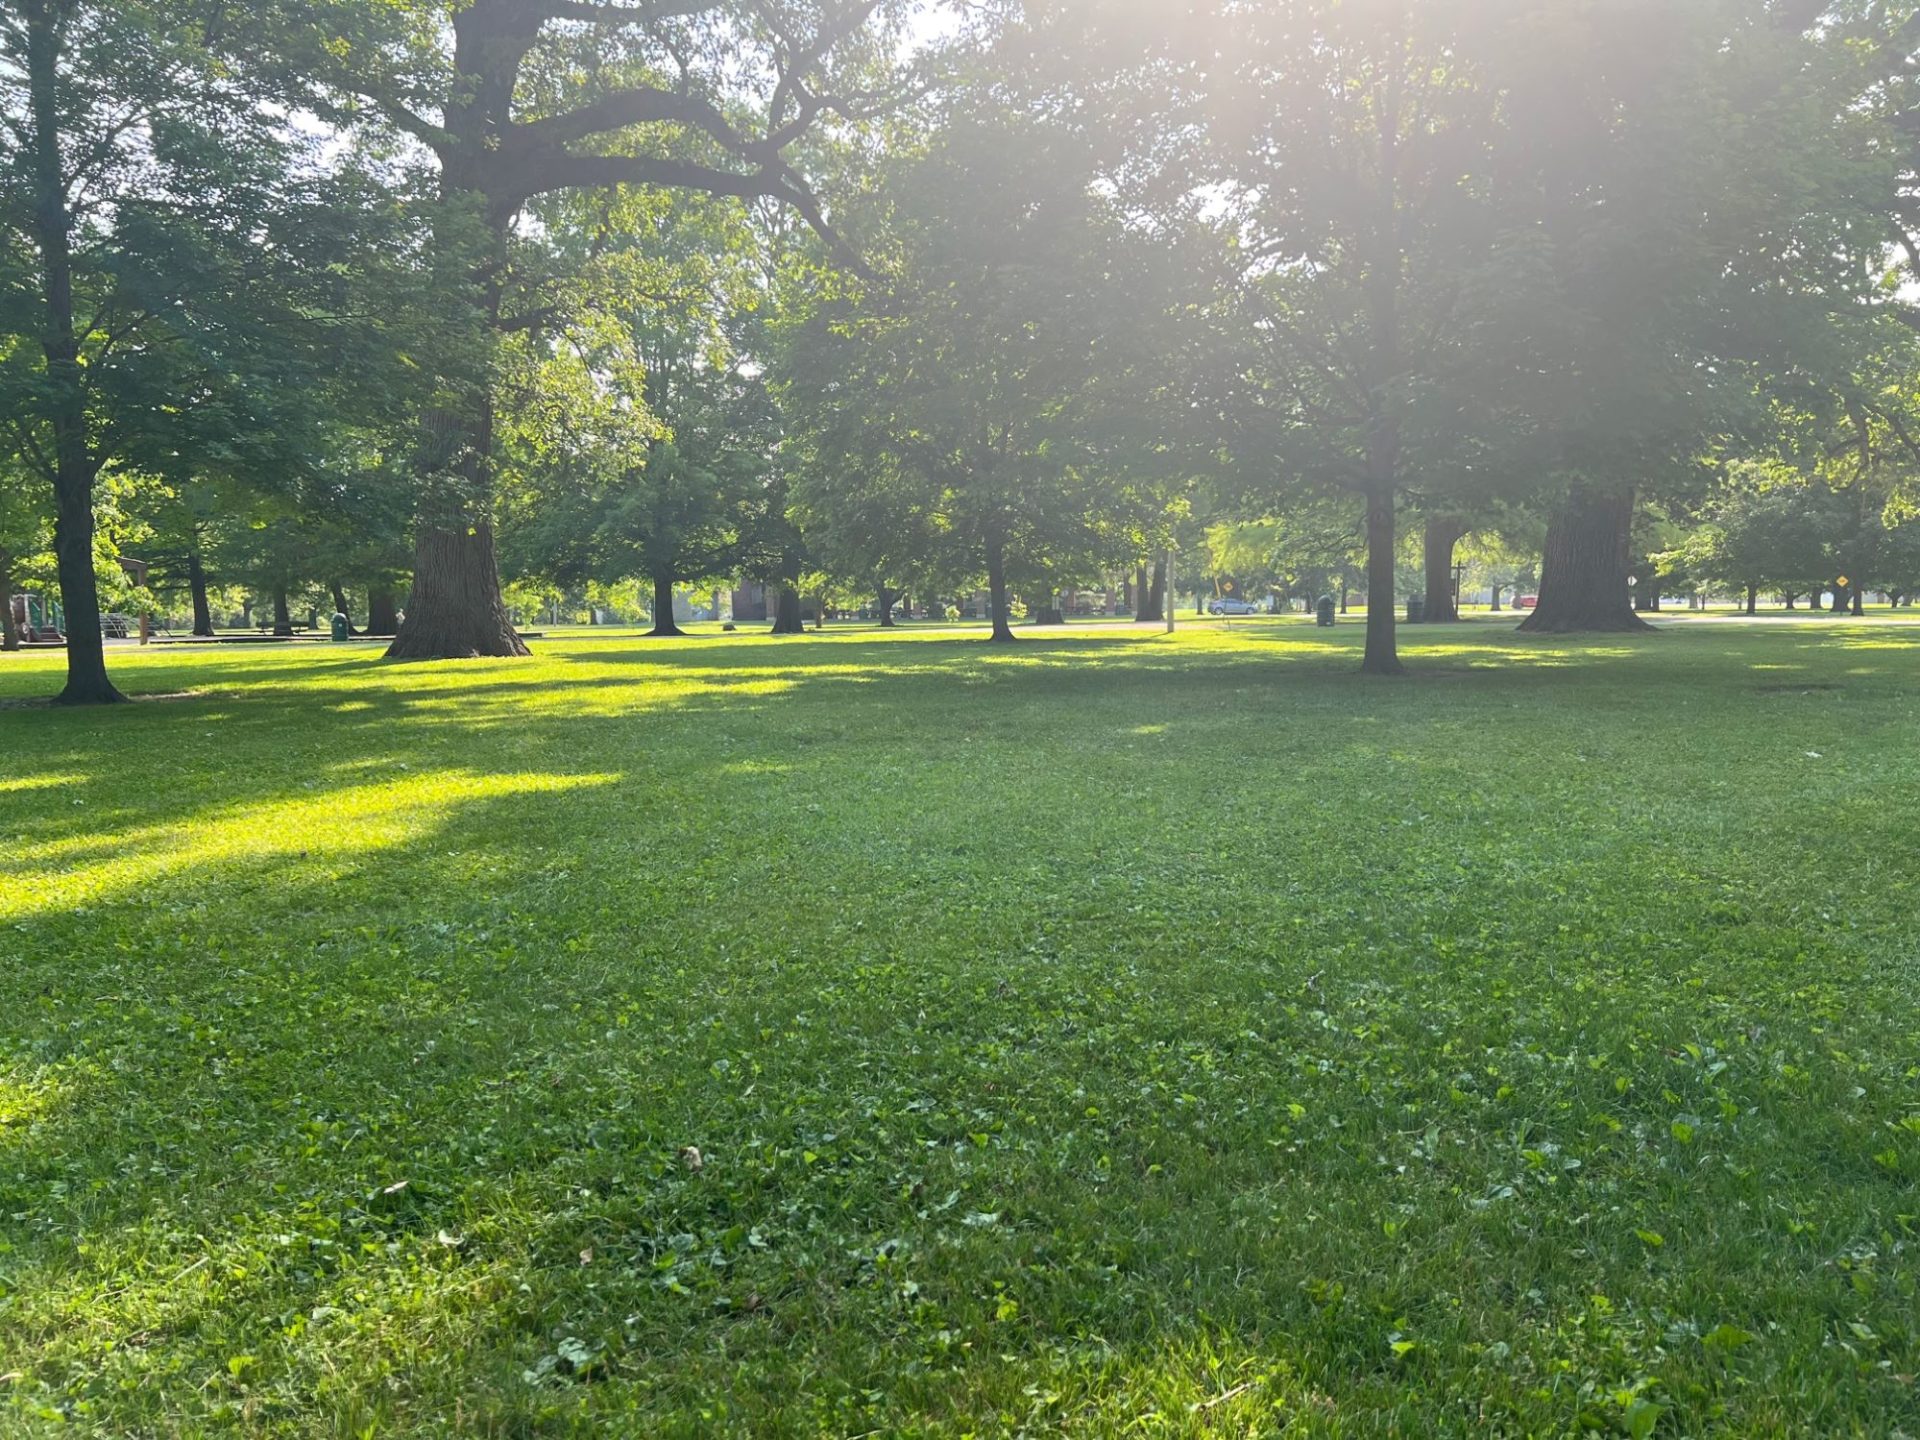 A large grassy area with patches of sunlight on it. On the other side of the open area are several mature trees with green leaves.